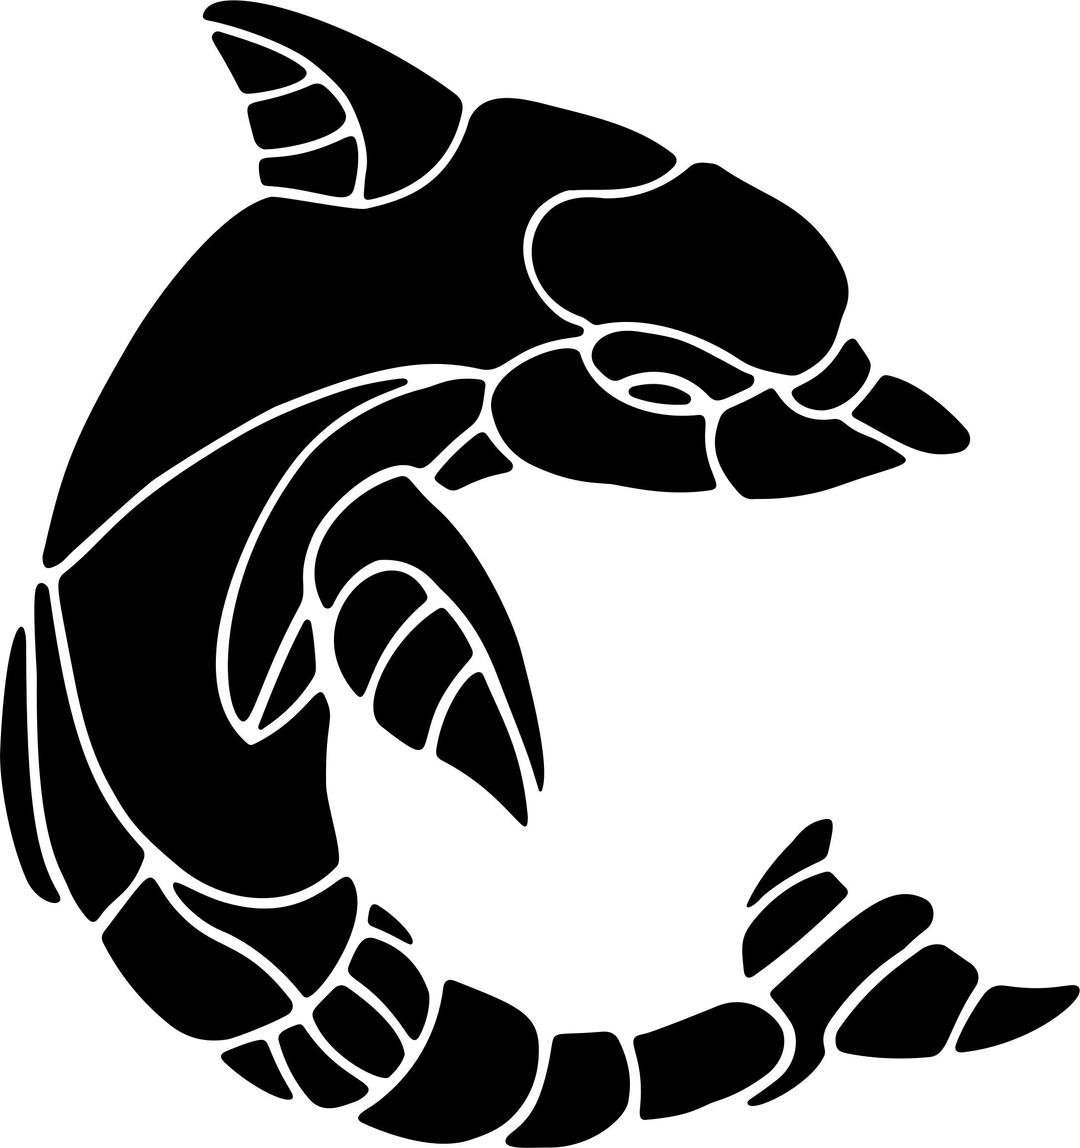 Segmented Dolphin Silhouette png transparent